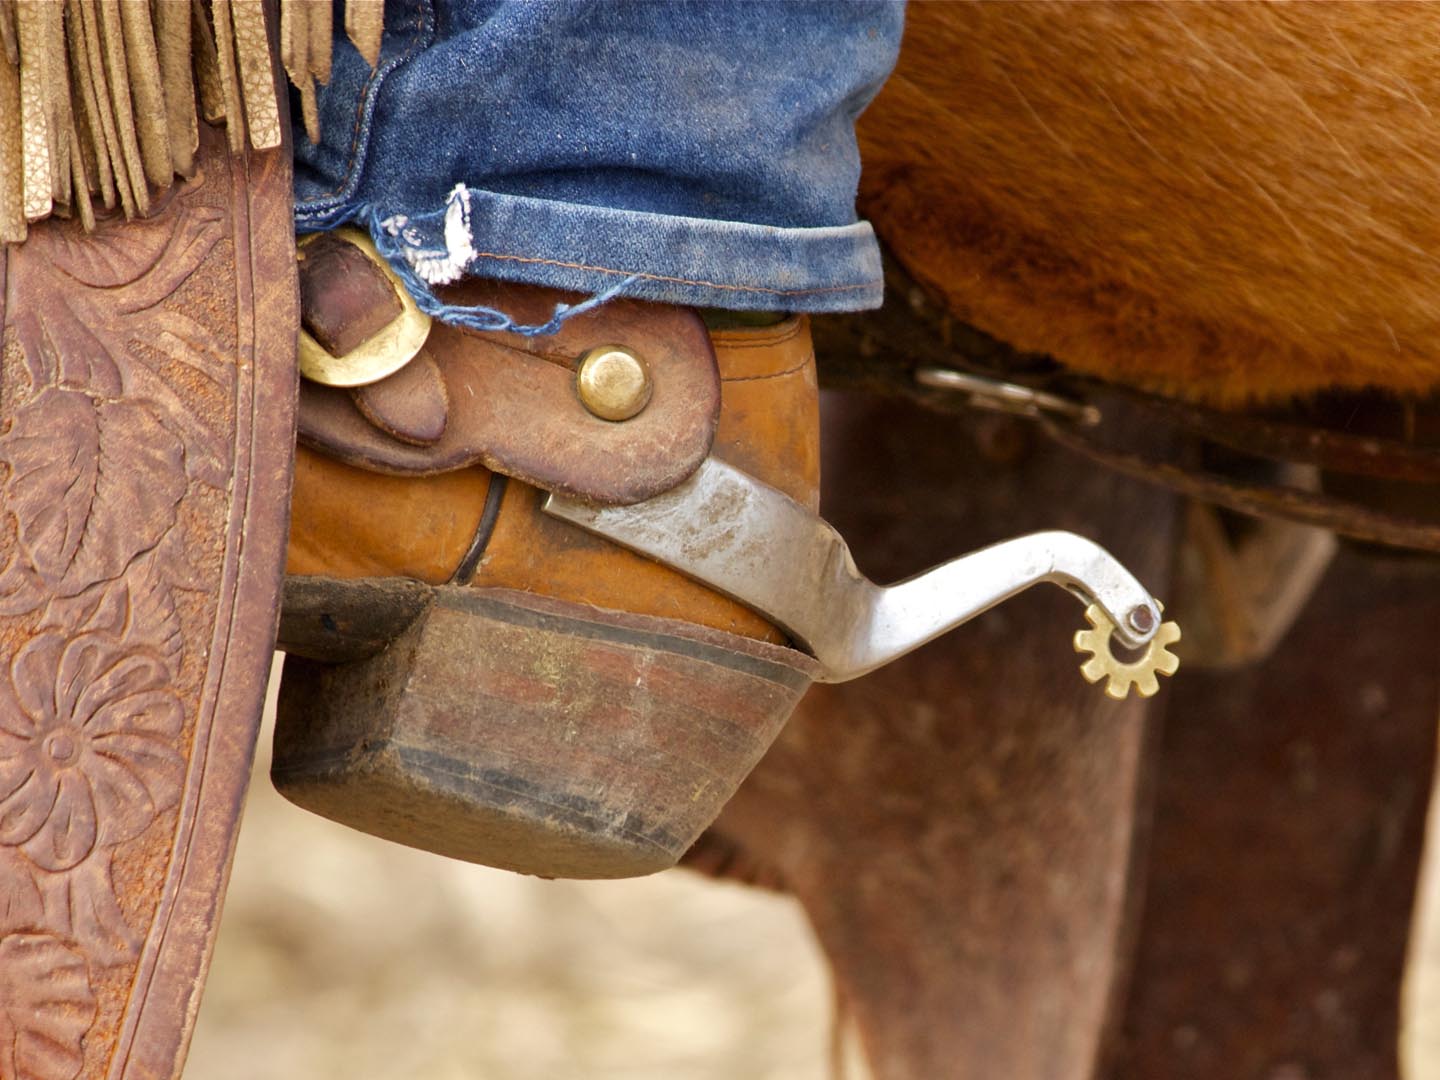 A western spur on a cowboy boot.